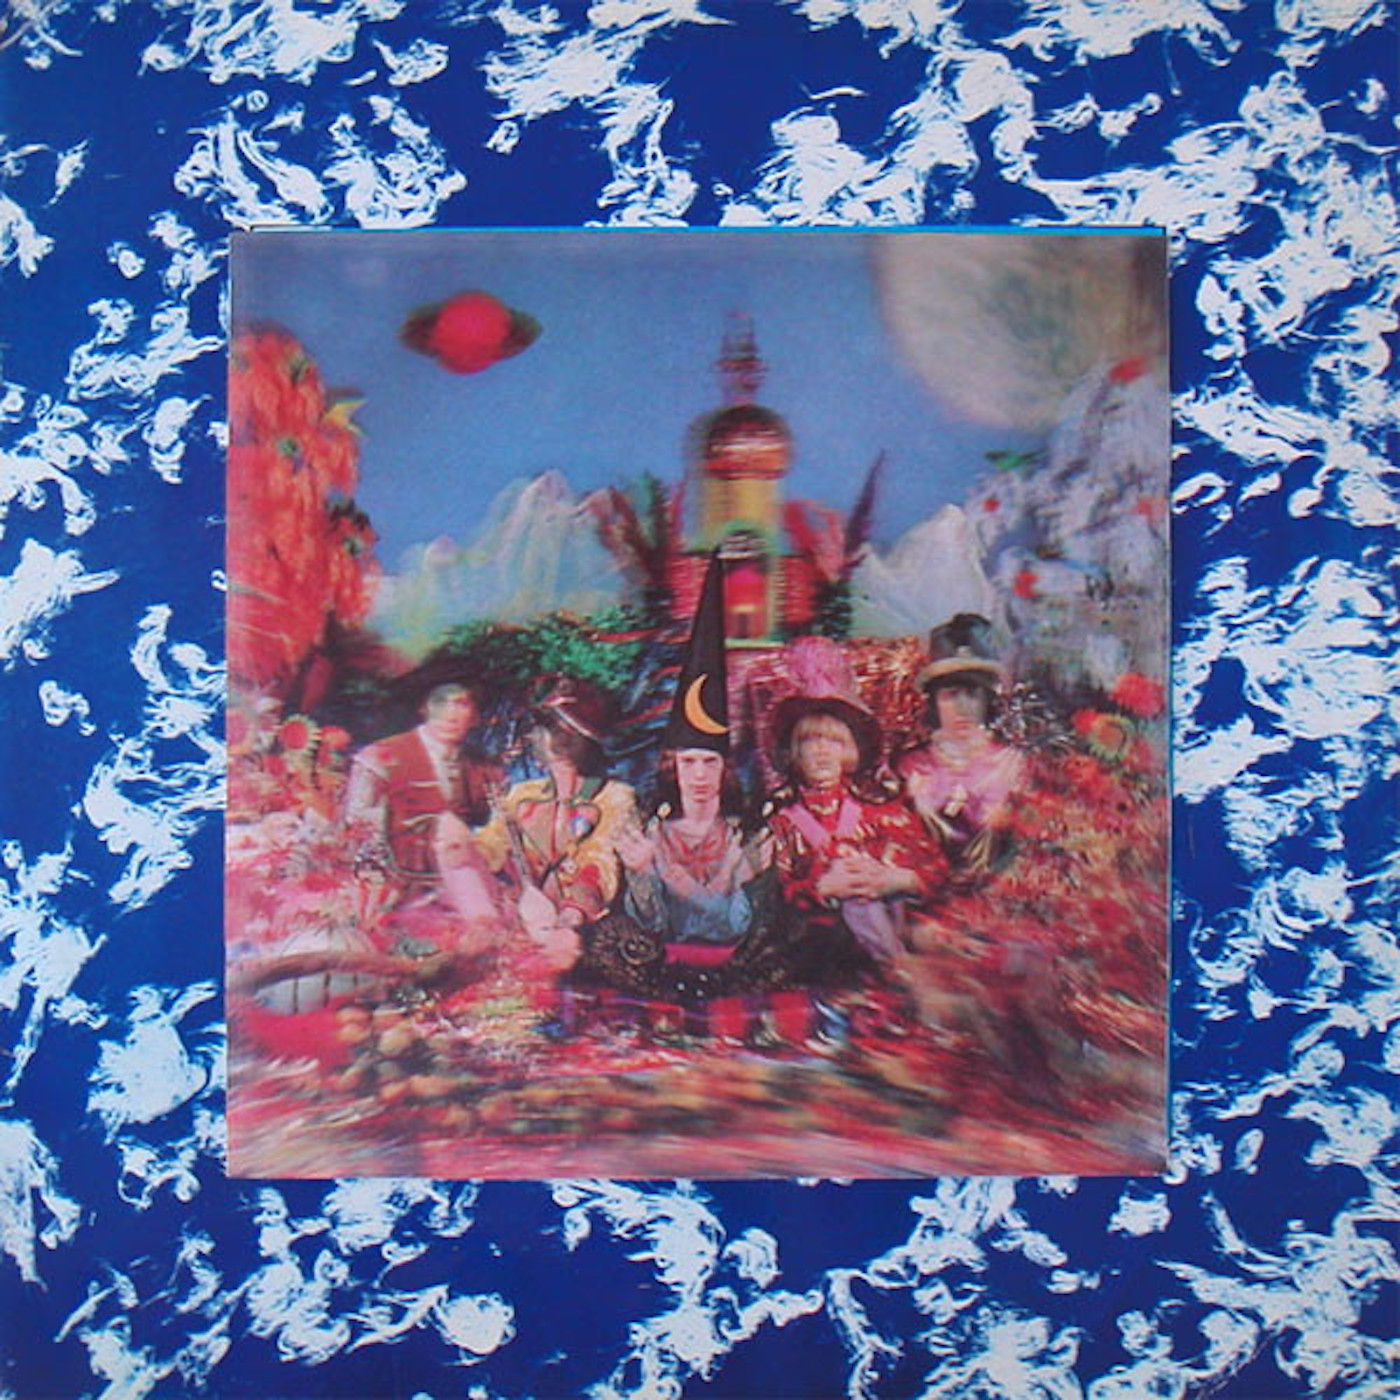 The Rolling Stones’ “Their Satanic Majesties Request”